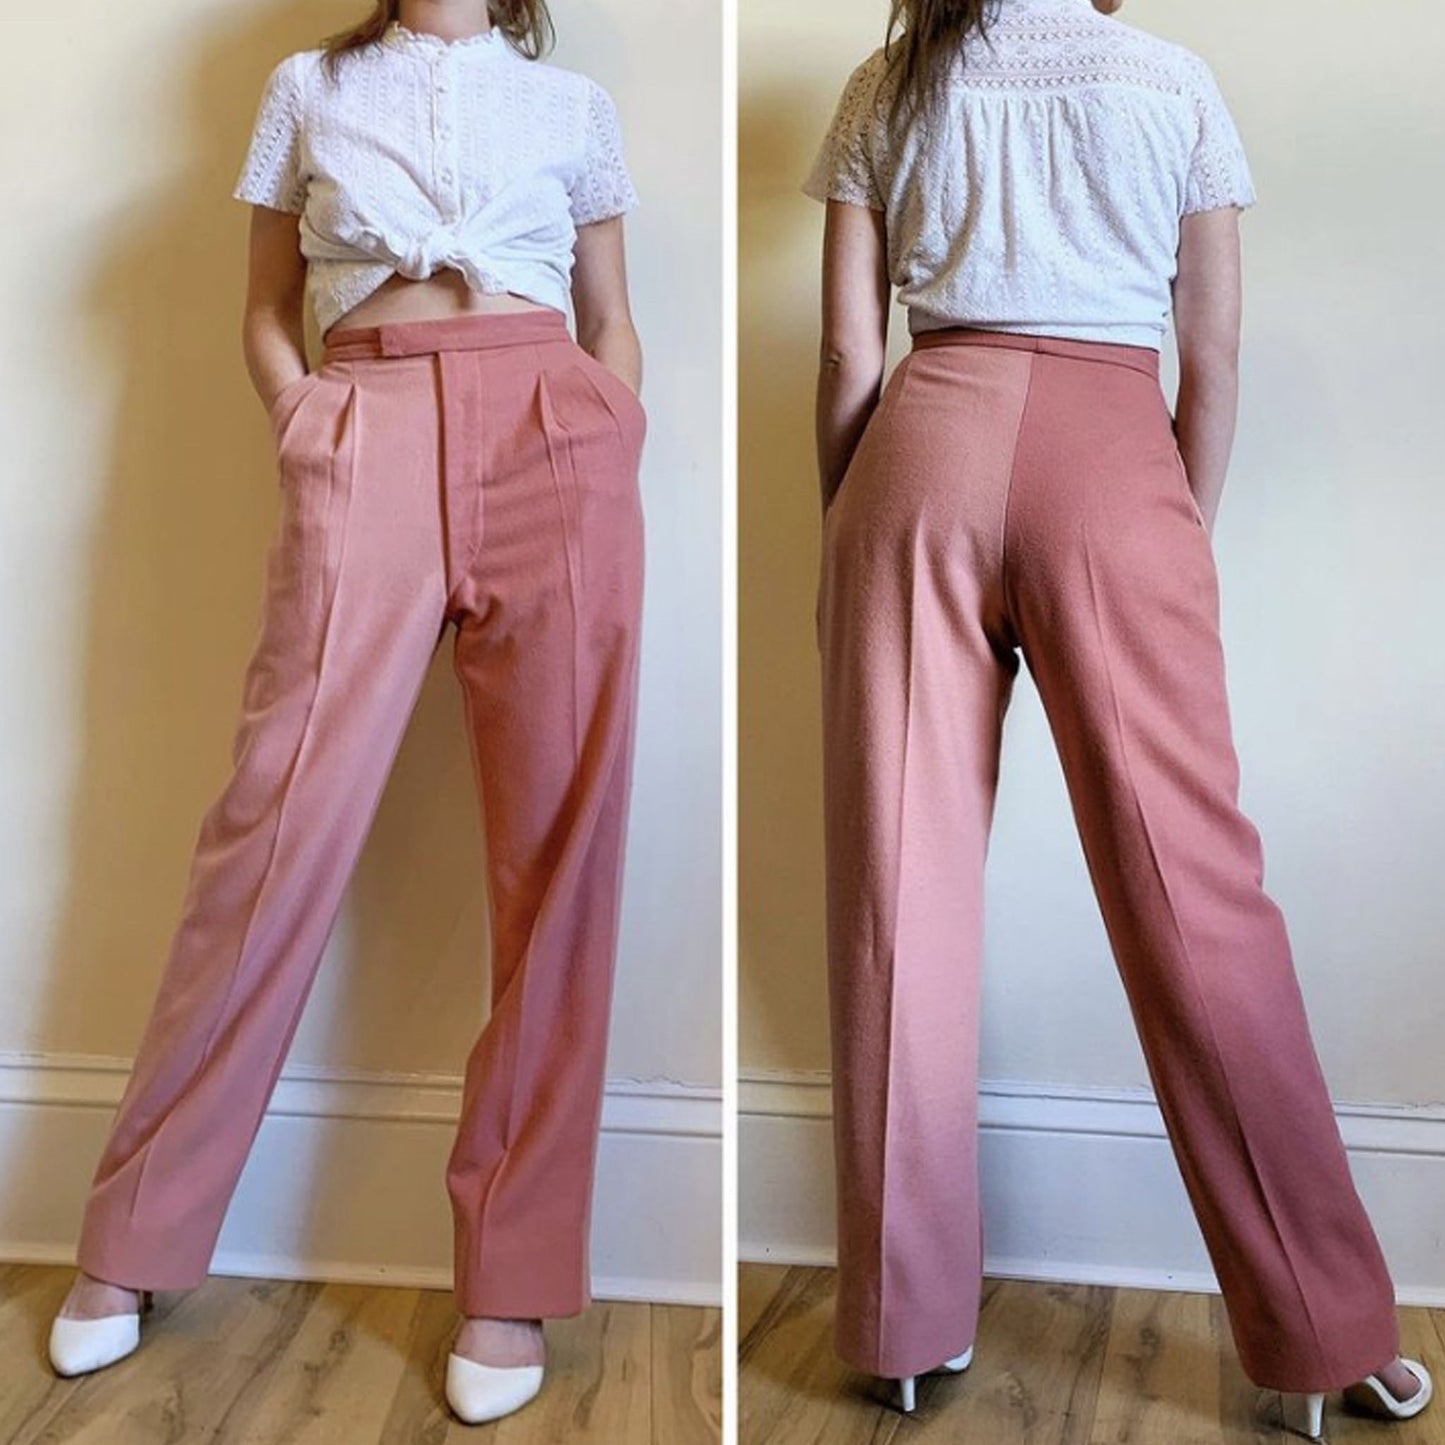 Model wearing slacks made from sewing pattern Simplicity S113